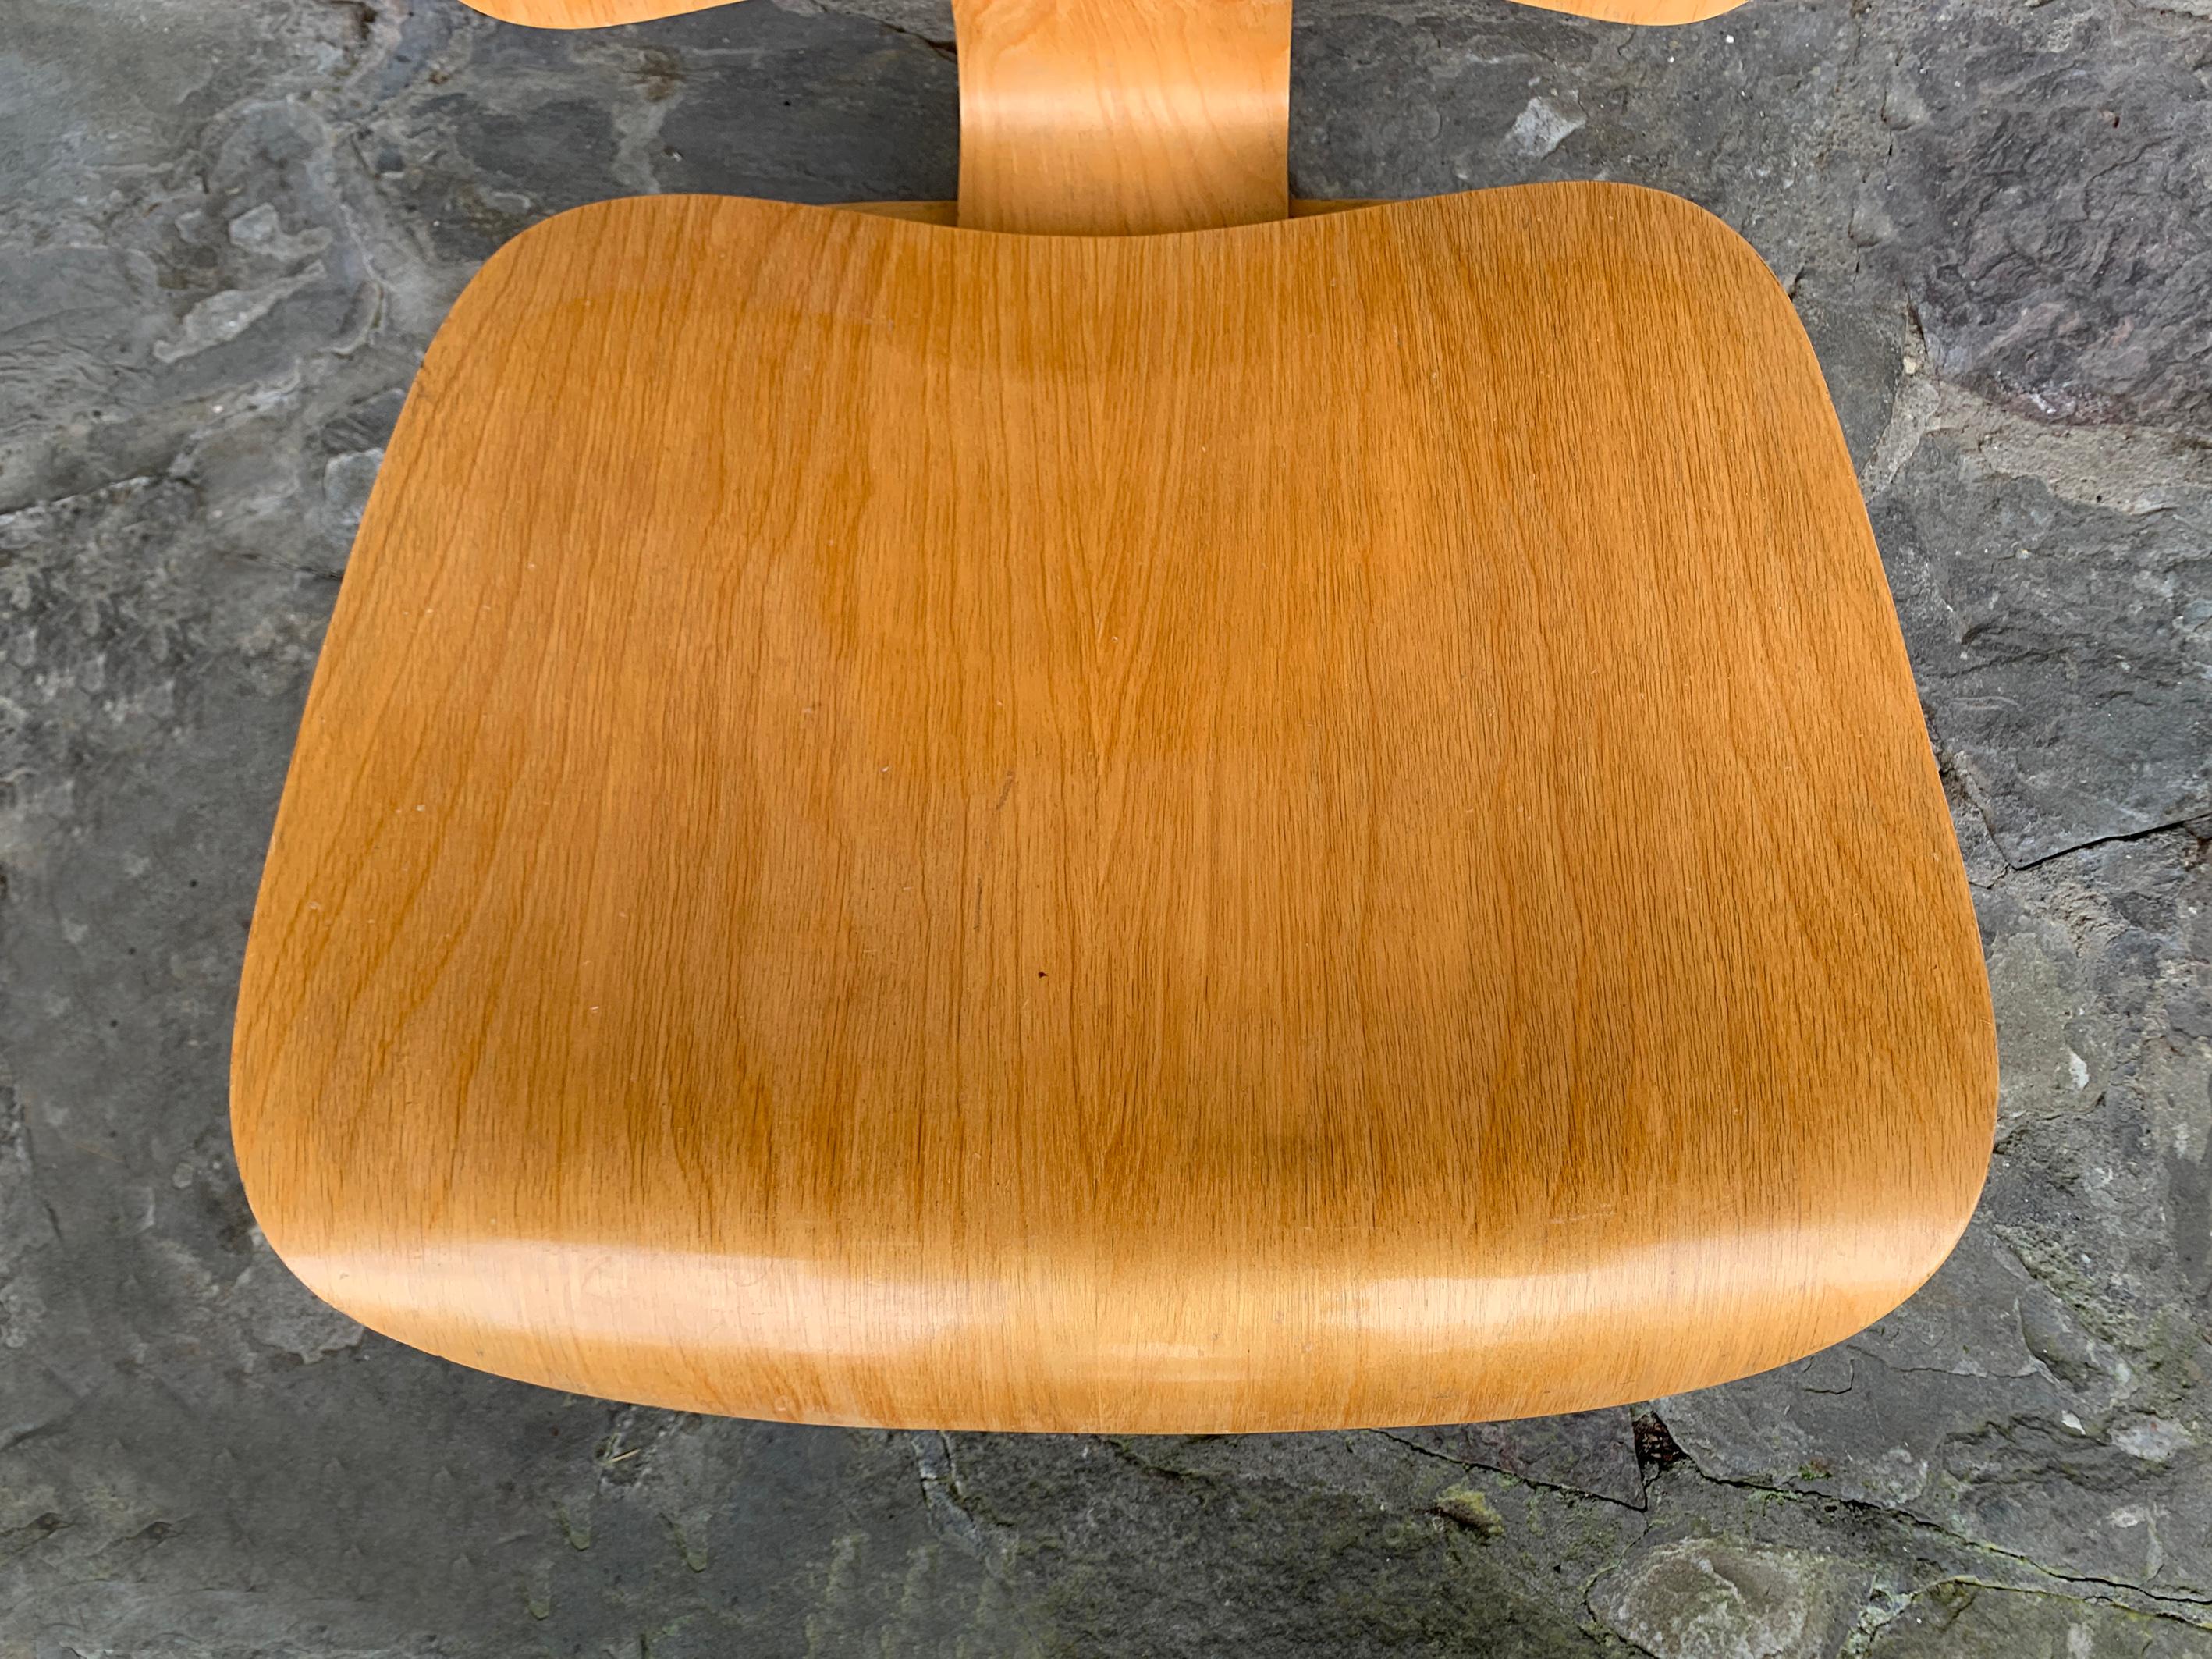 American Early LCW Lounge Chair in Birch by Charles & Ray Eames, Herman Miller, 1950s For Sale